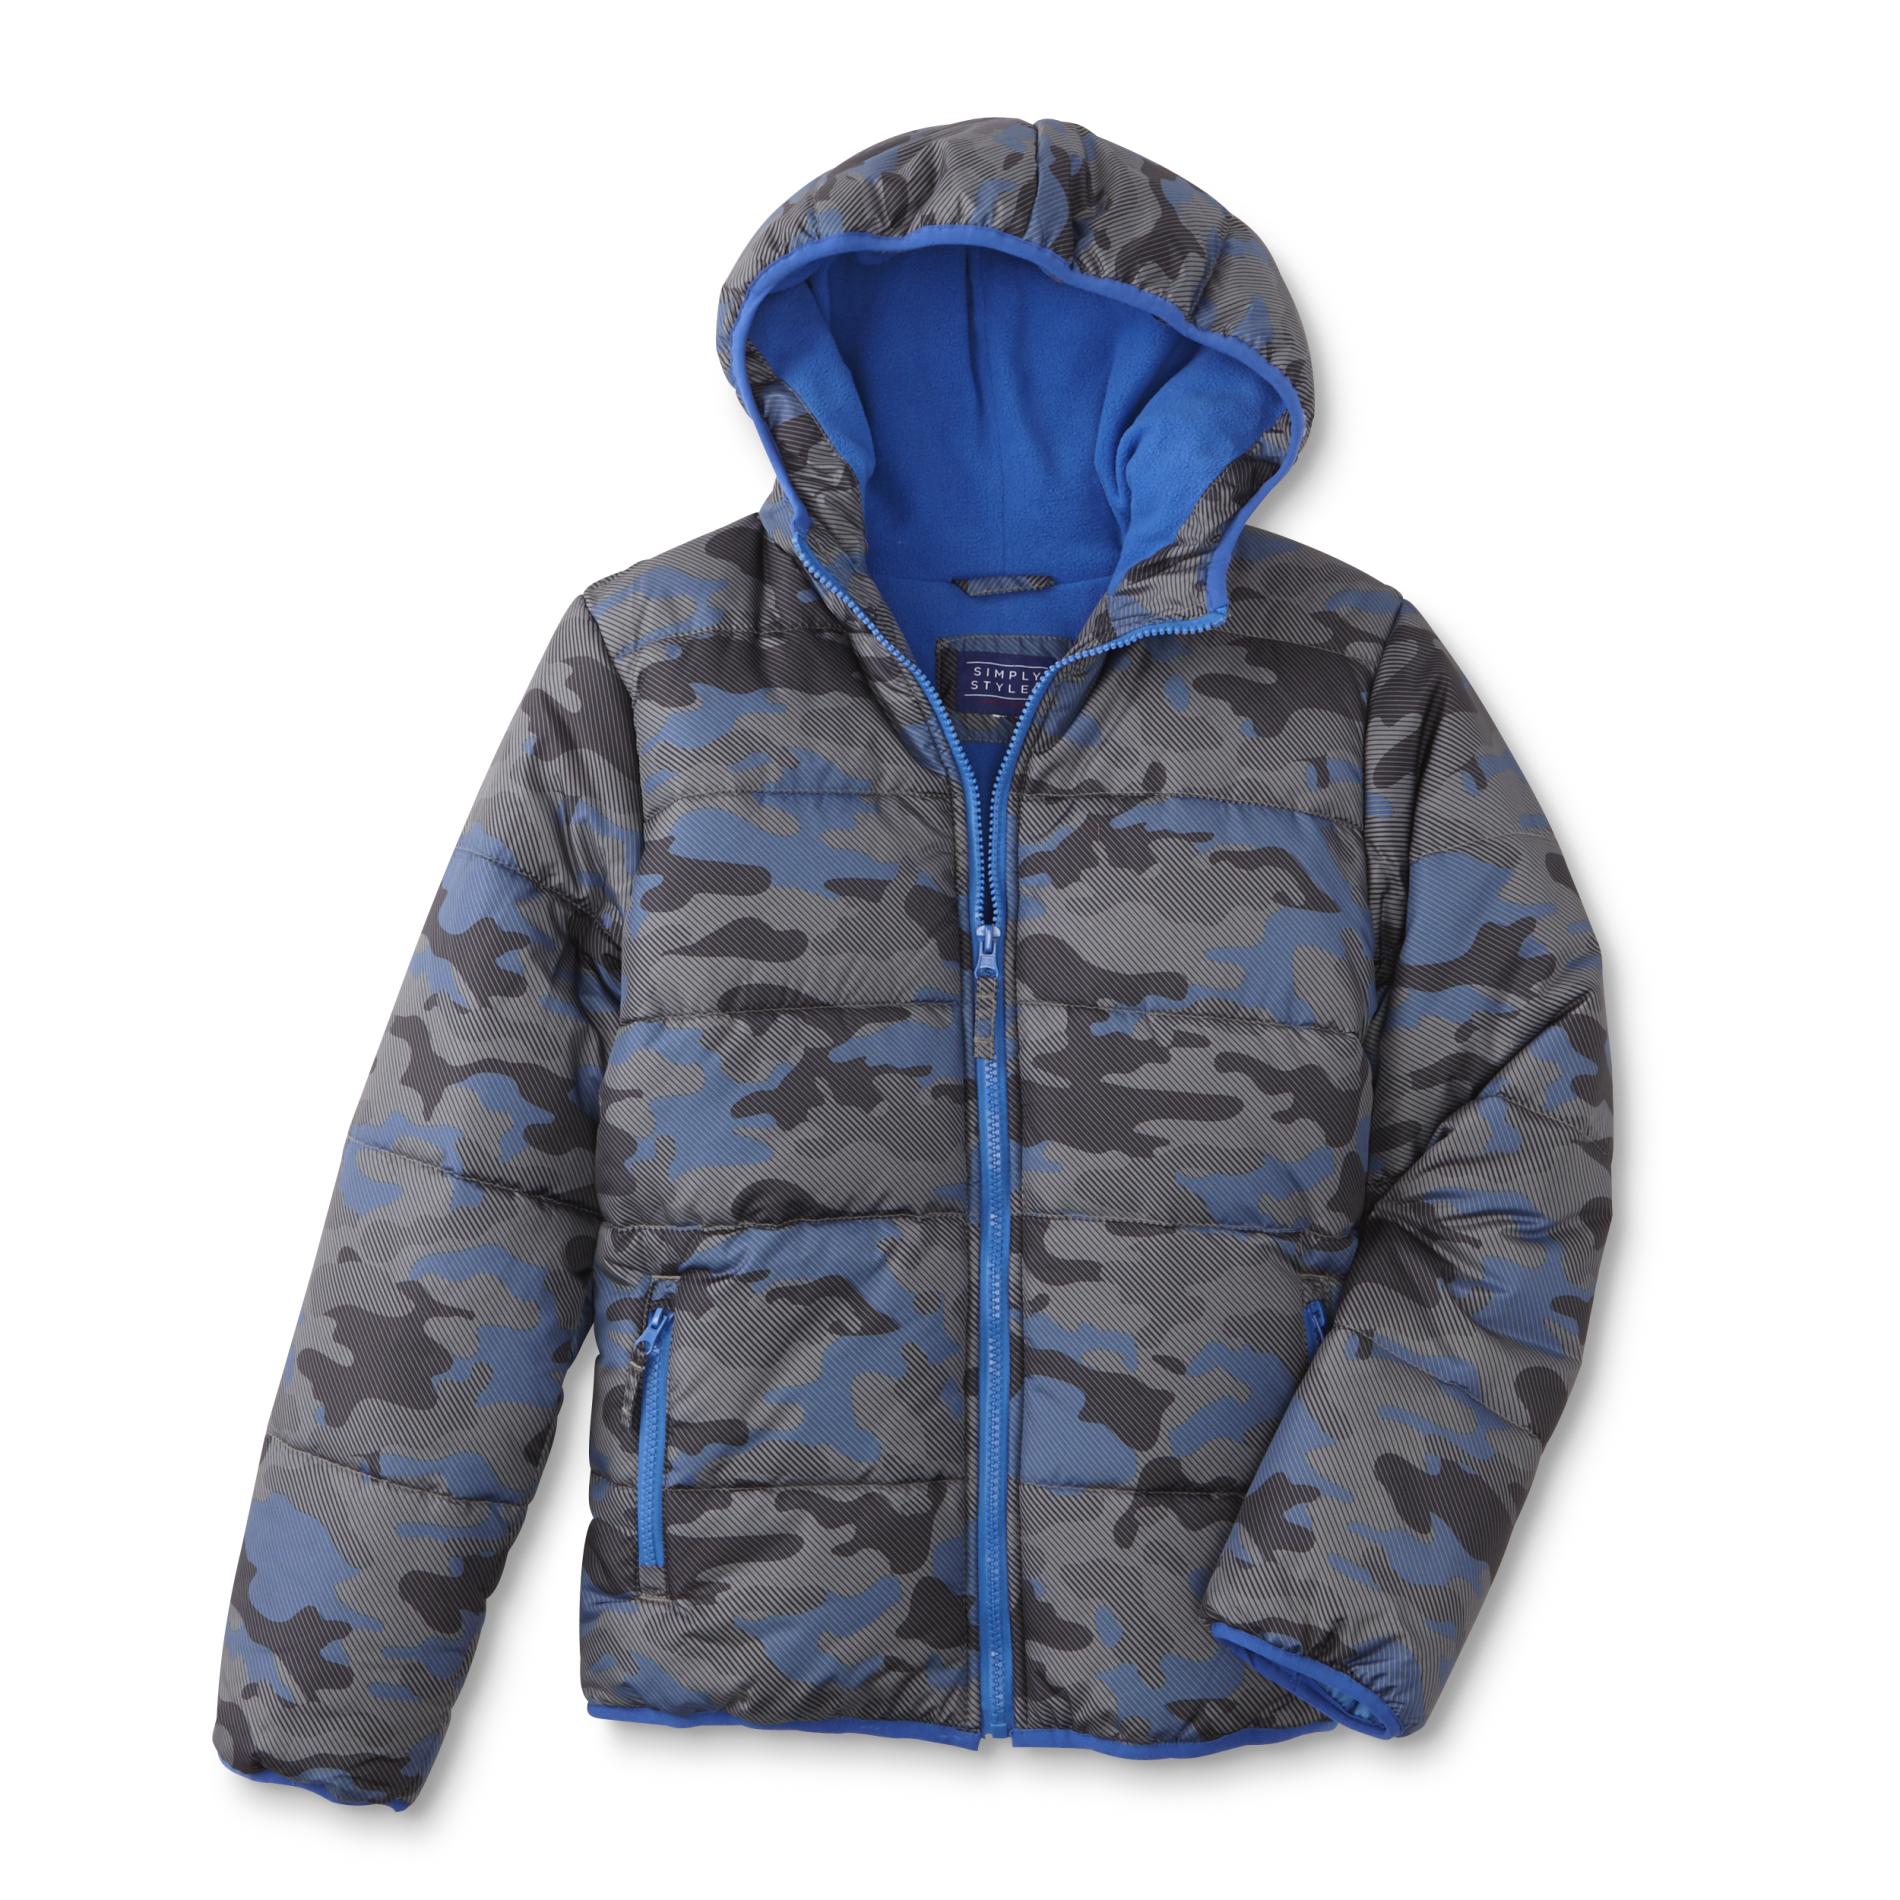 Simply Styled Boy's Hooded Winter Jacket - Camo